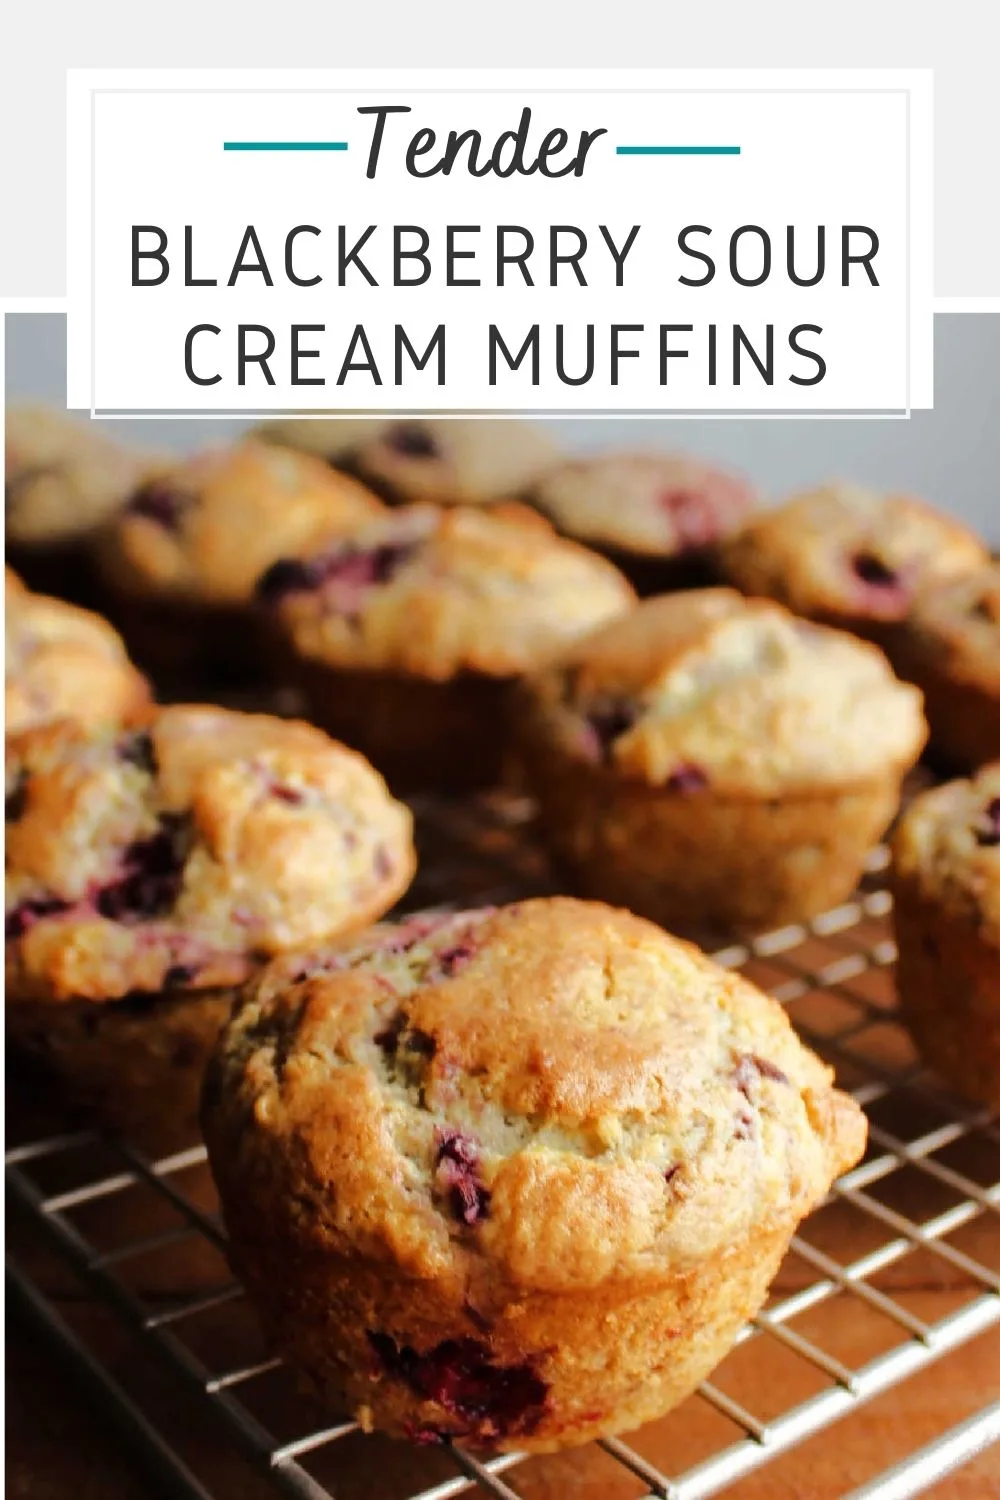 Tender blackberry sour cream muffins are the perfect mix of fresh fruit and sweet baked good. They are pretty, easy to whip up and perfect for a grab and go breakfast.